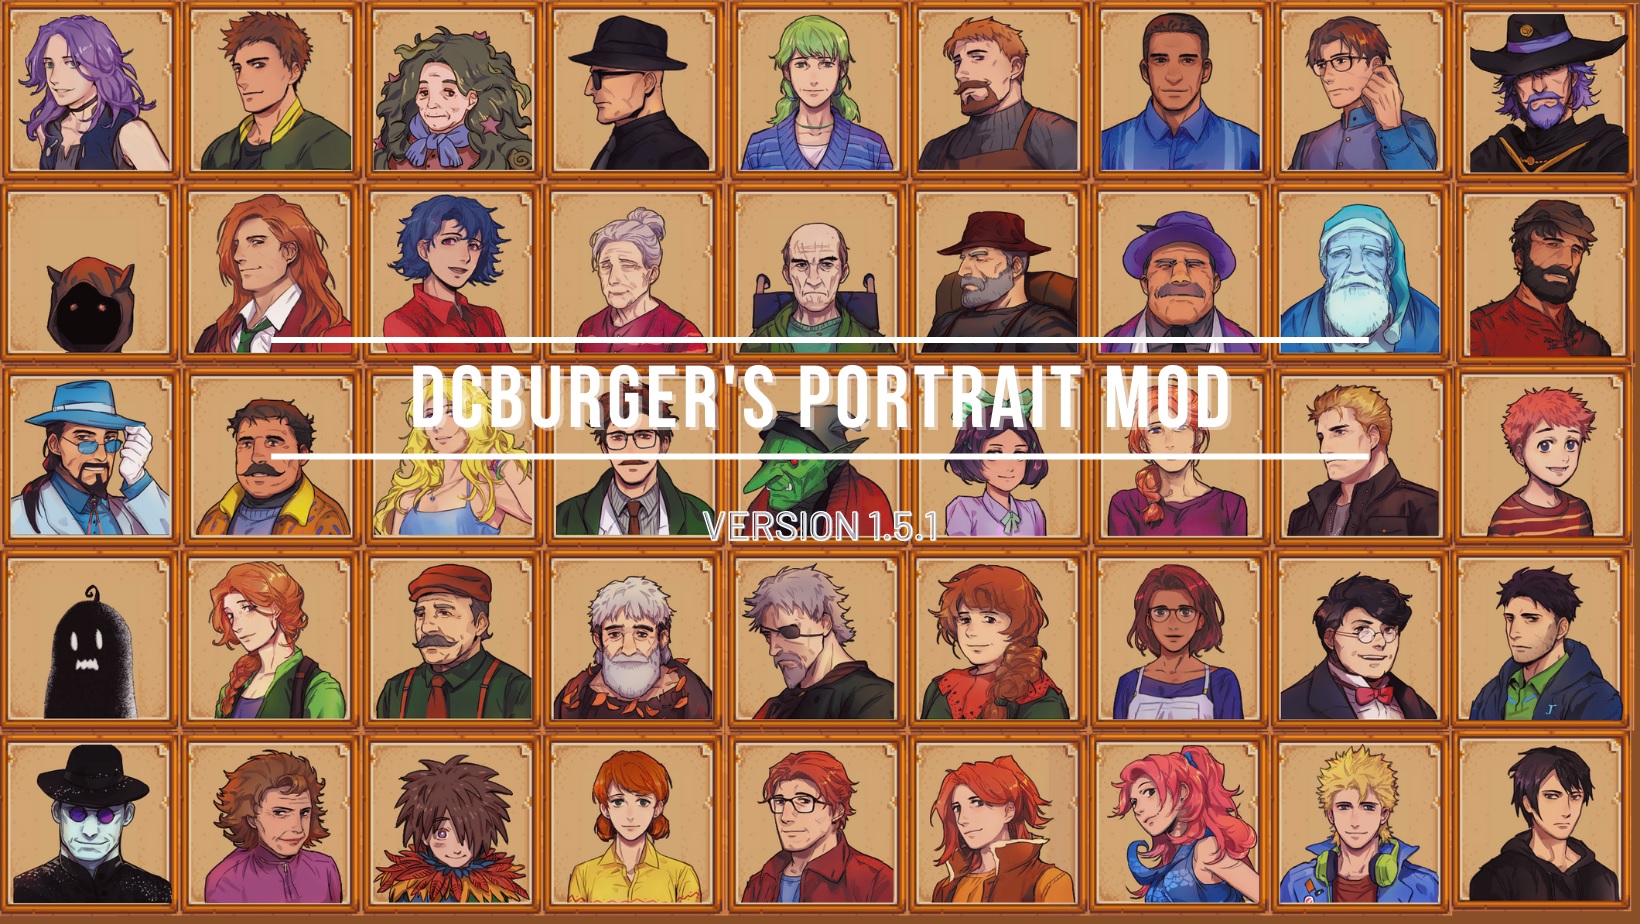 Stardew Valley mod - Every Stardew Valley character portrait in DCBurger's style